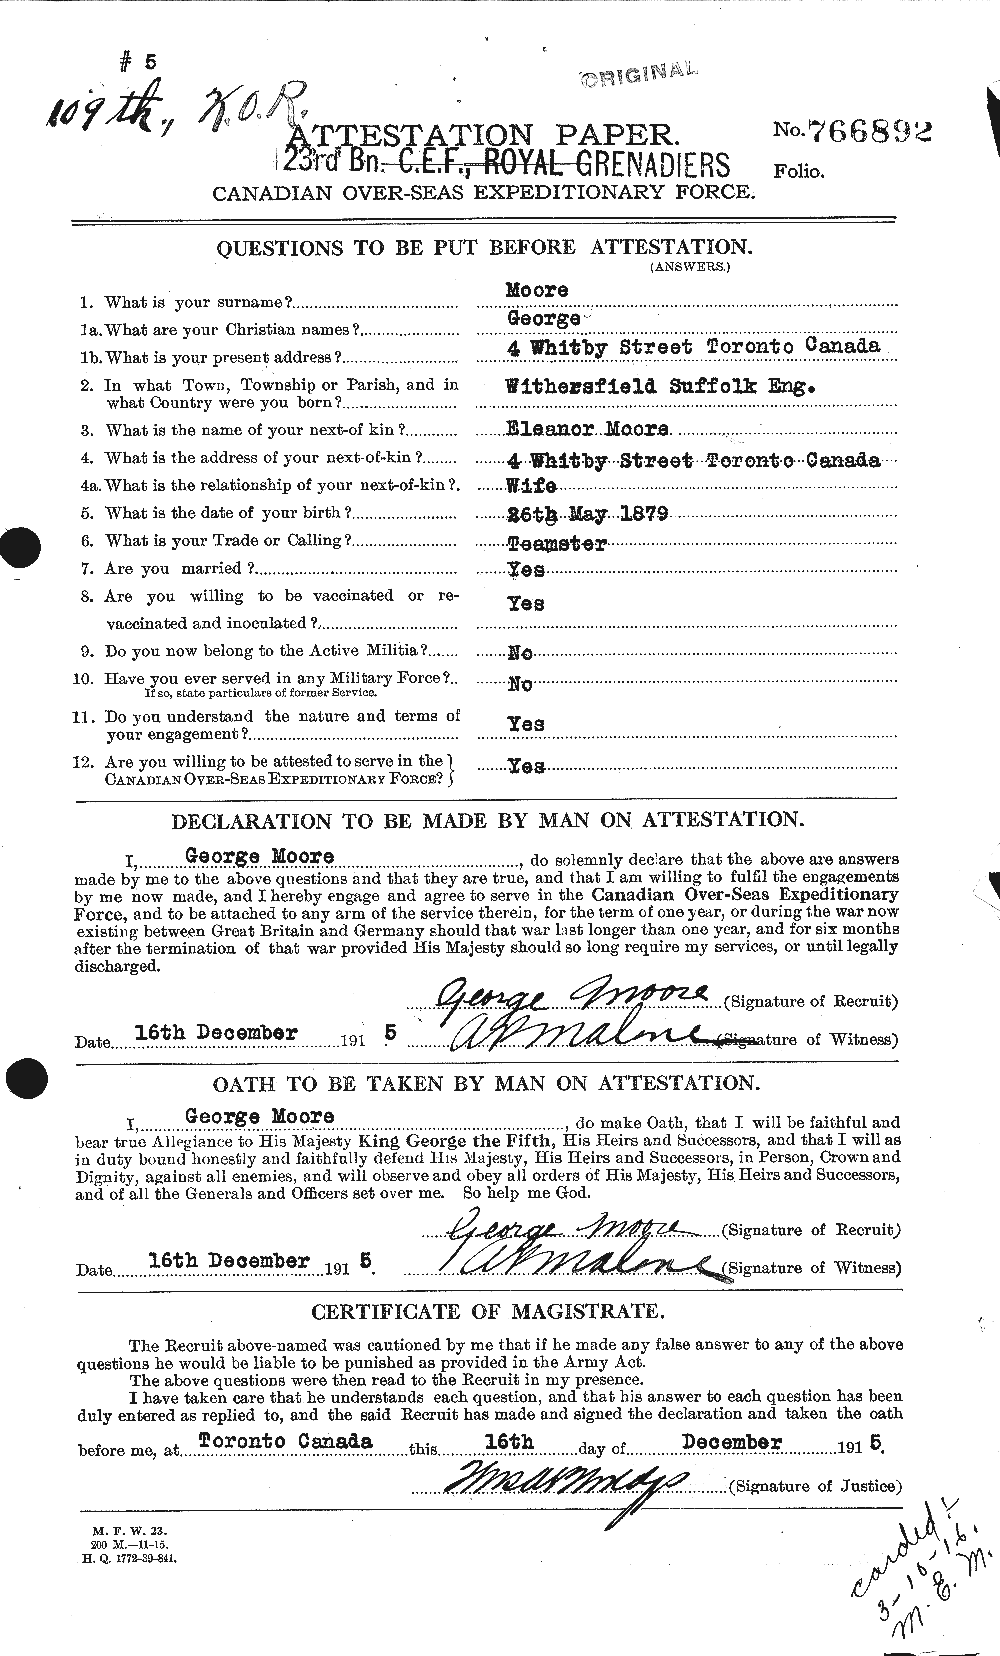 Personnel Records of the First World War - CEF 509397a